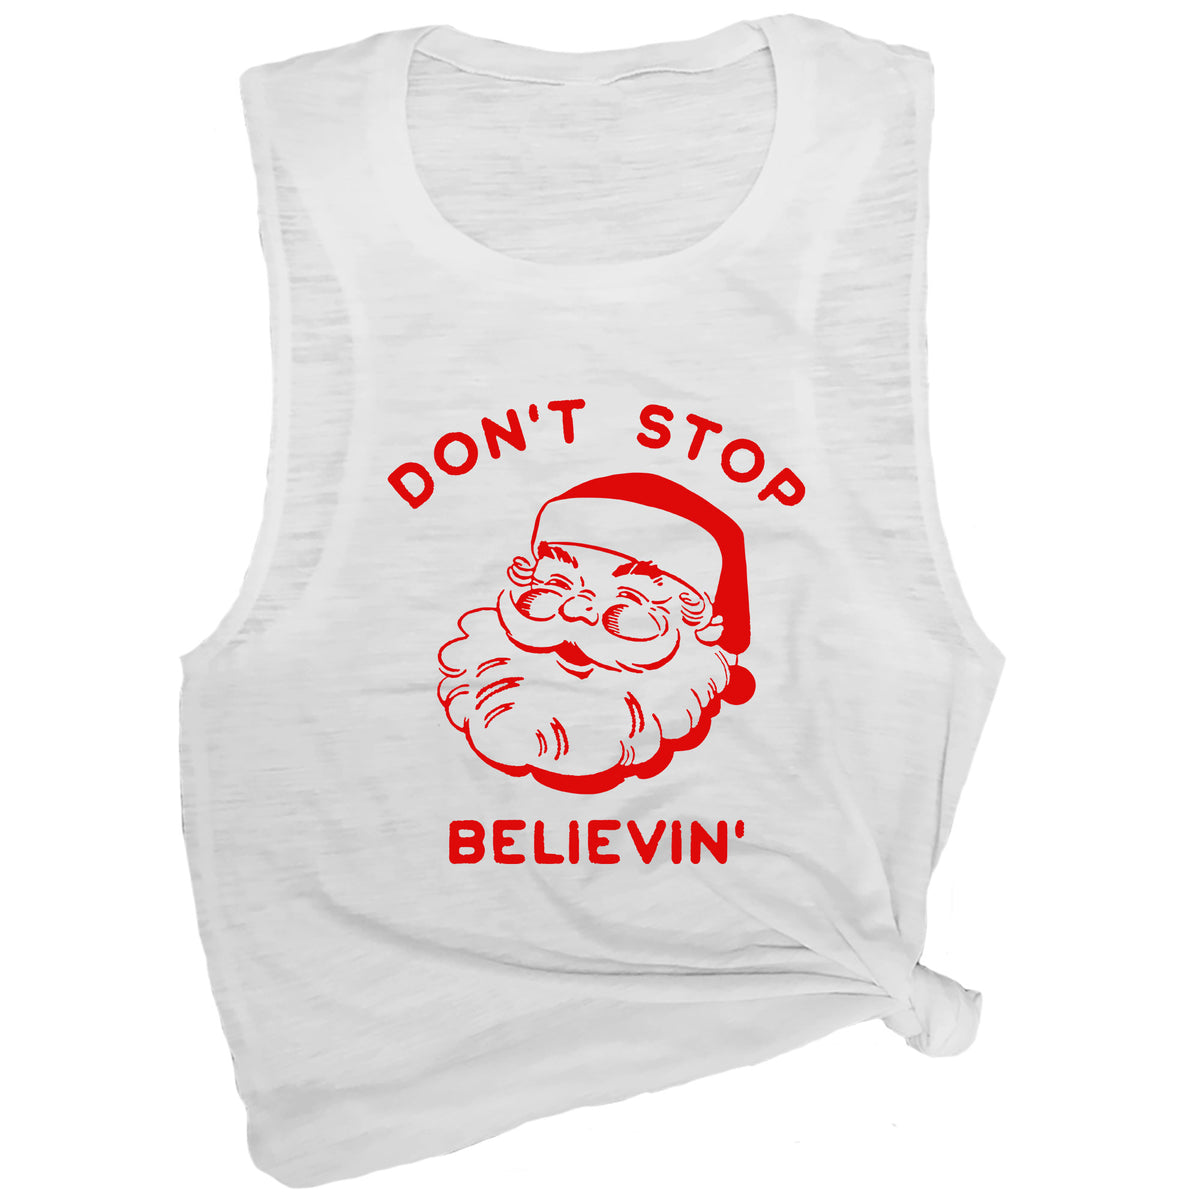 Don't Stop Believin' Muscle Tee